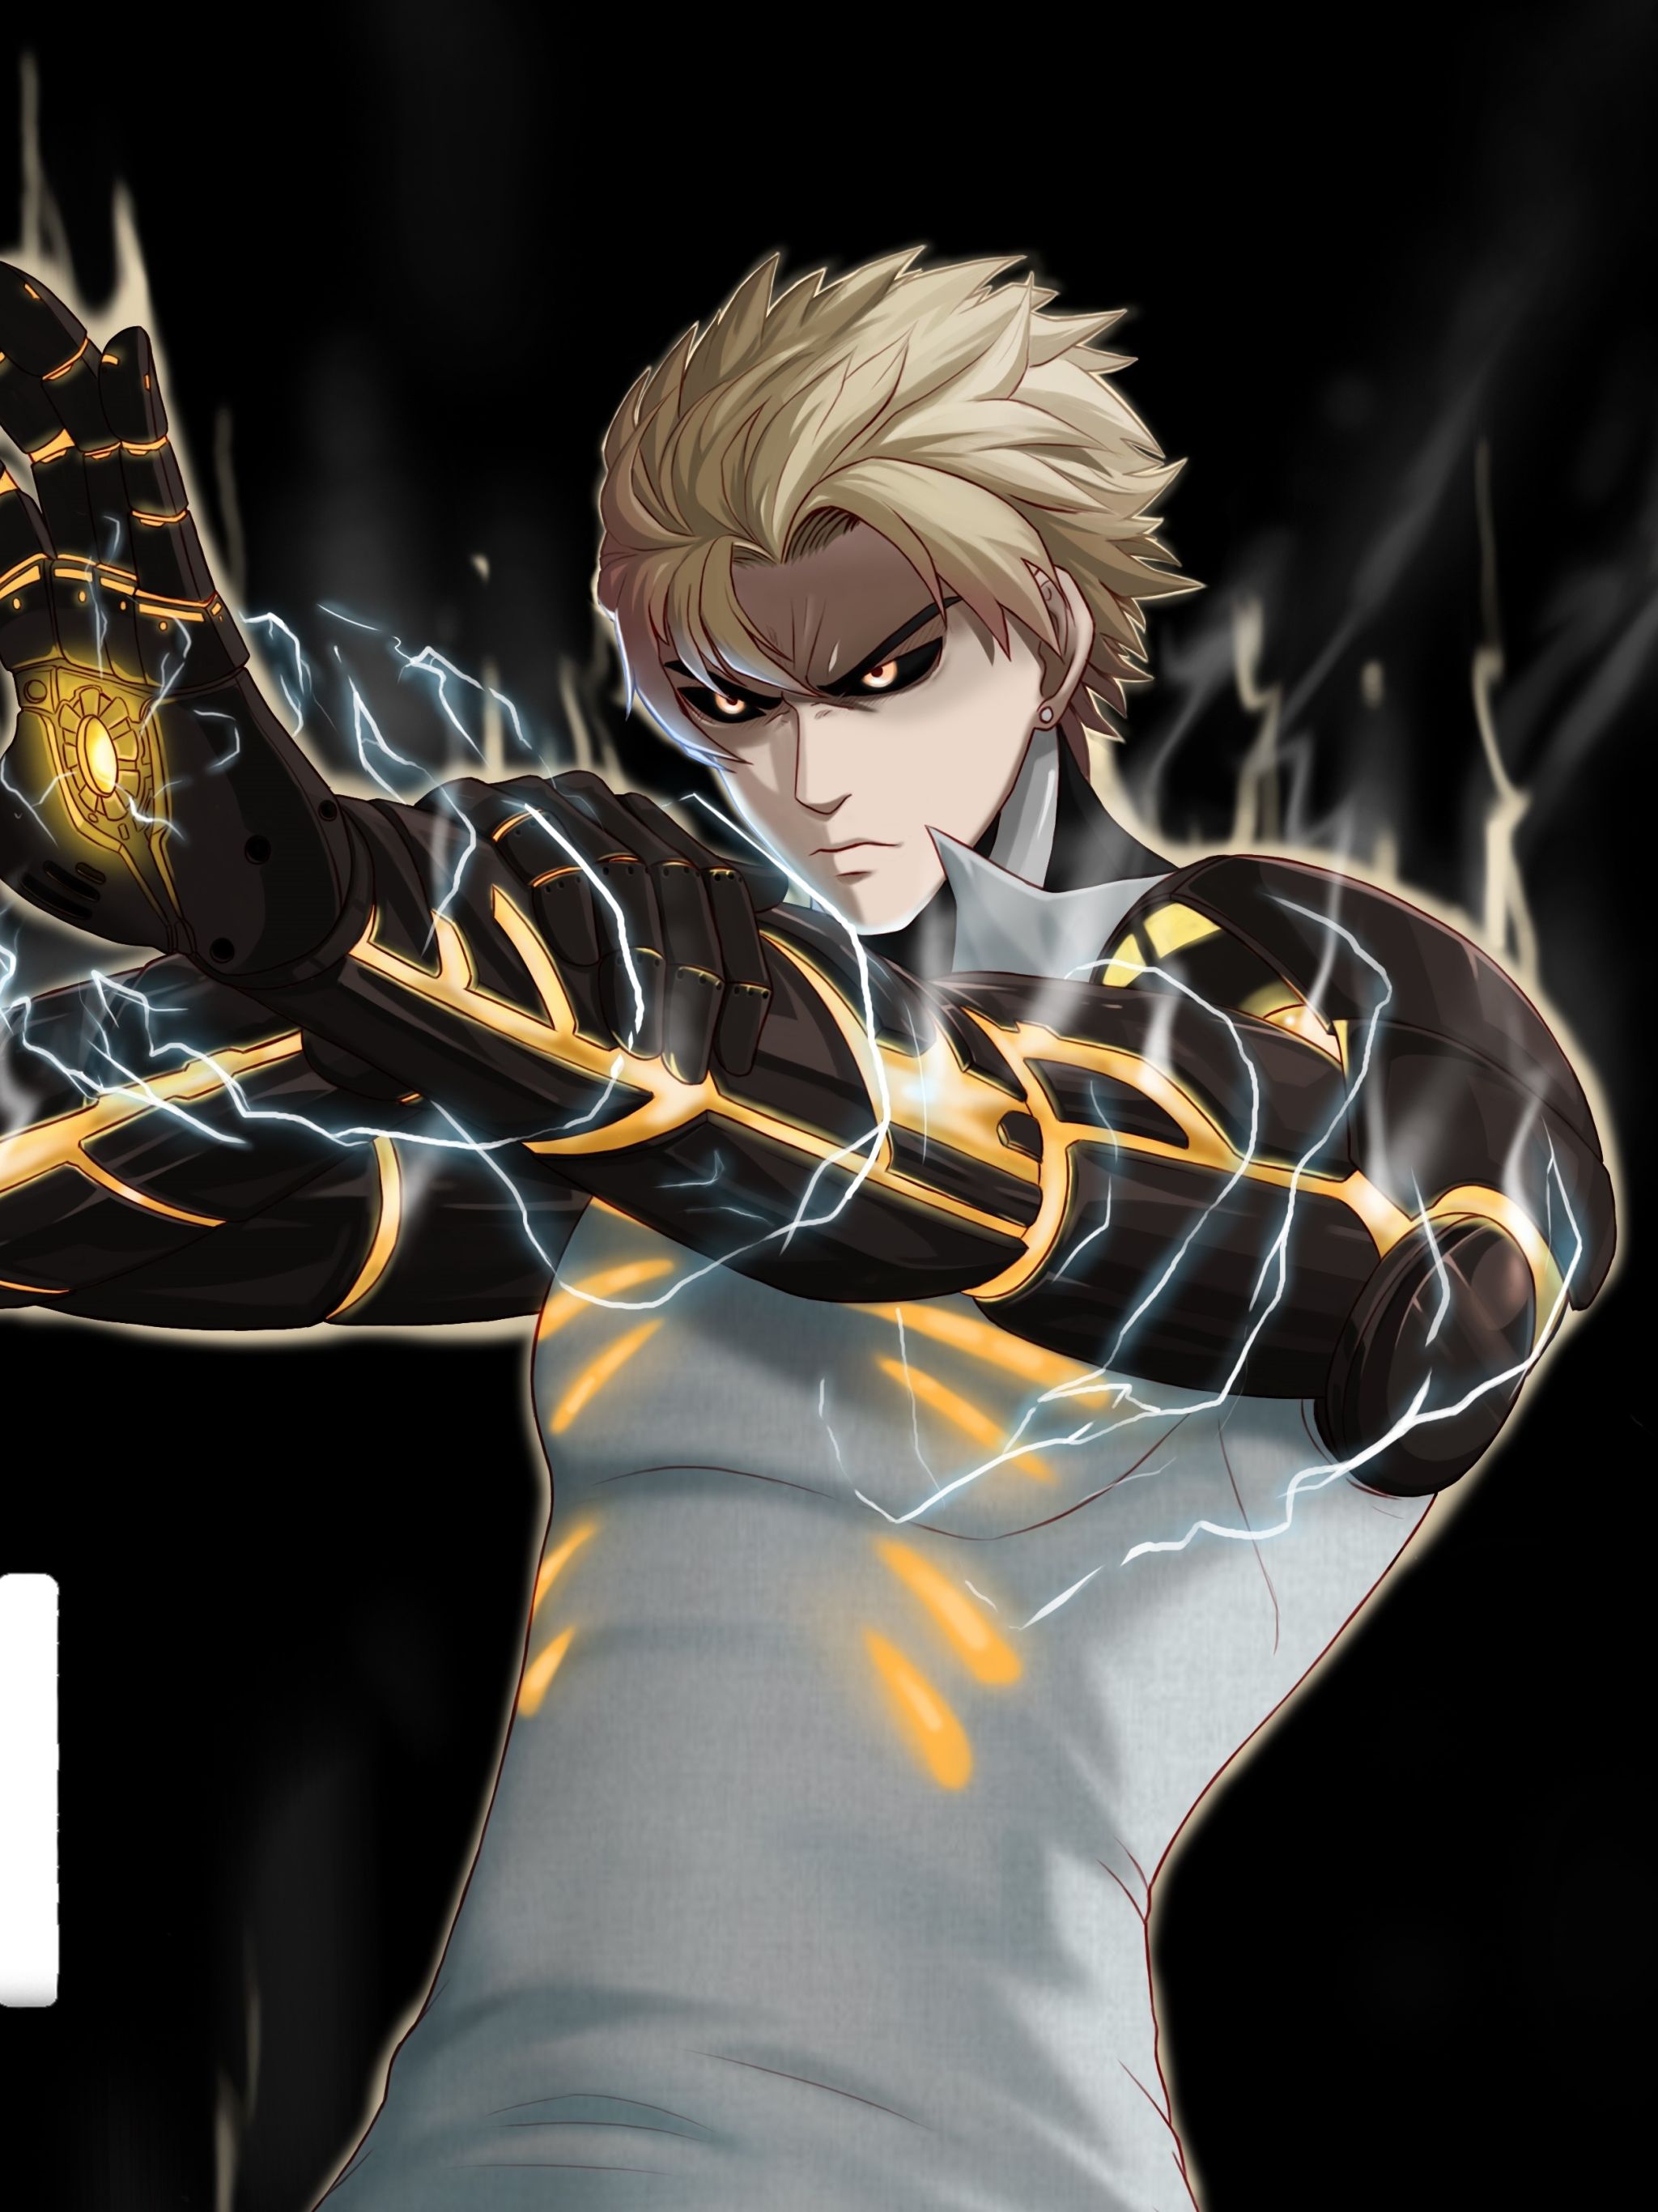 2048x2732 Genos One Punch Man 2048x2732 Resolution Wallpaper Hd Anime 4k Wallpaper Image Photo And Background